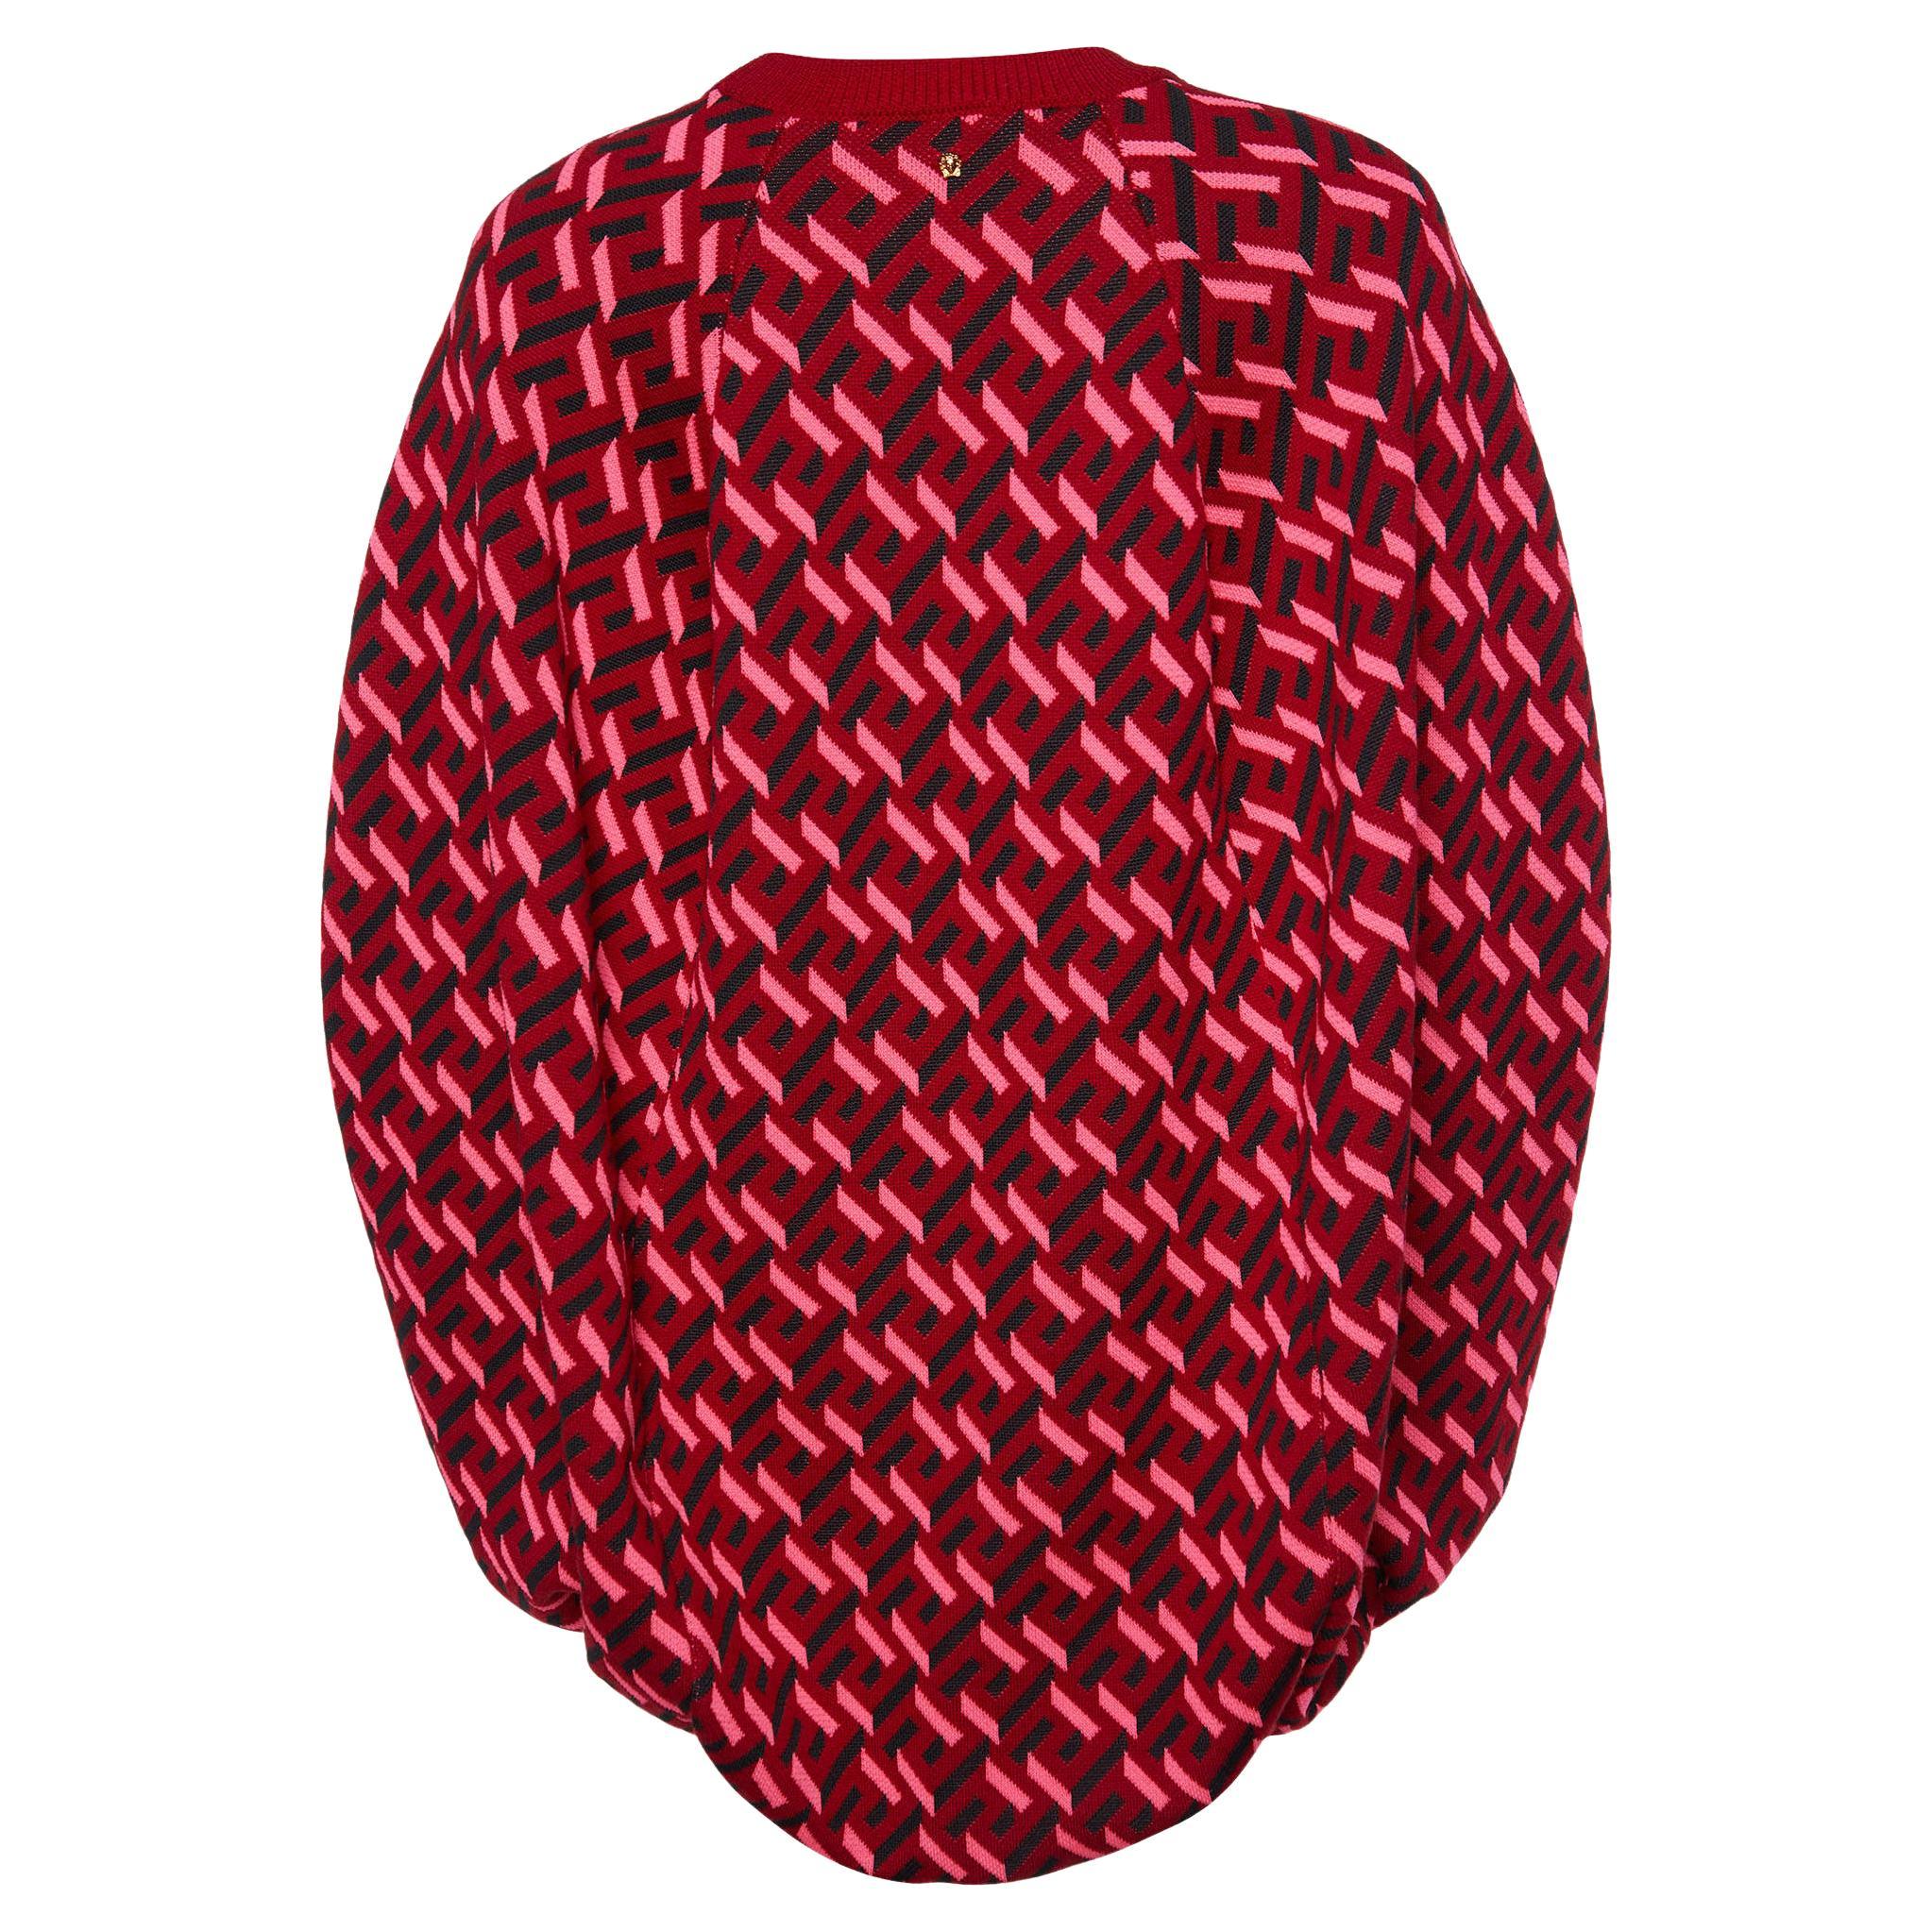 Versace Parade Red La Greca Jacquard Knit Cocoon Sweater M For Sale